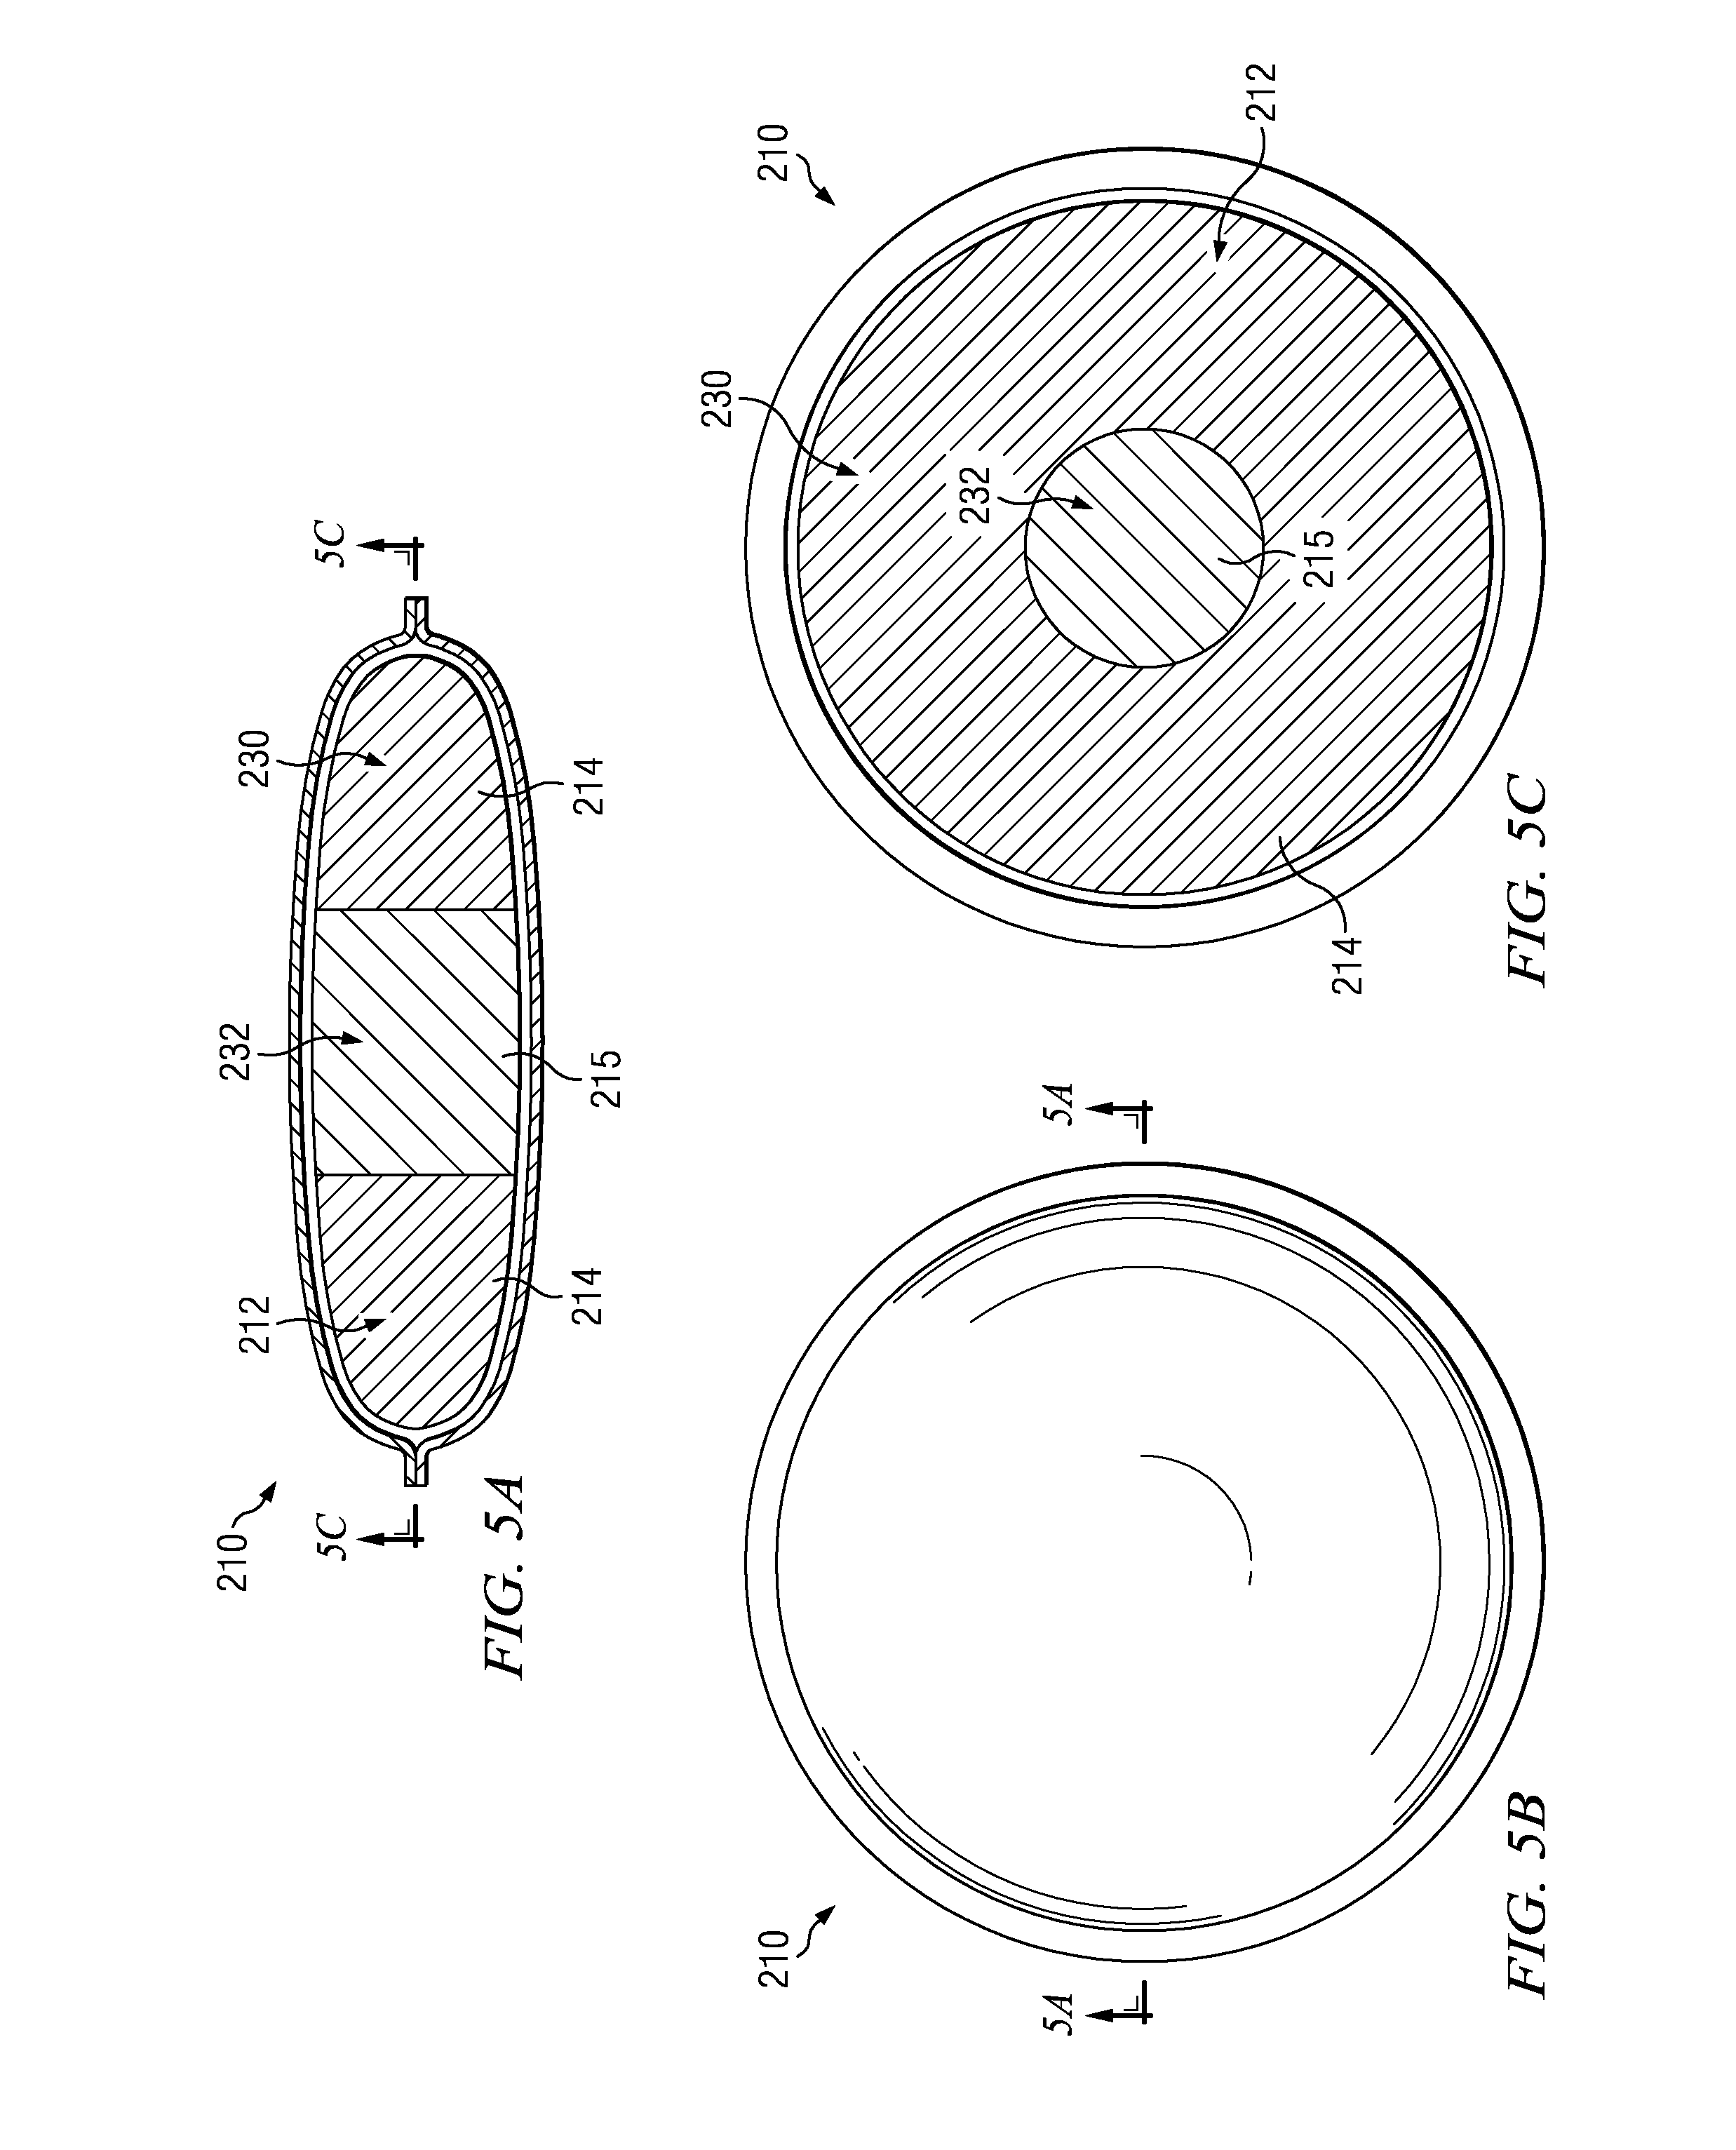 Personal Care Articles Having Multi-Zone Compliant Personal Care Compositions